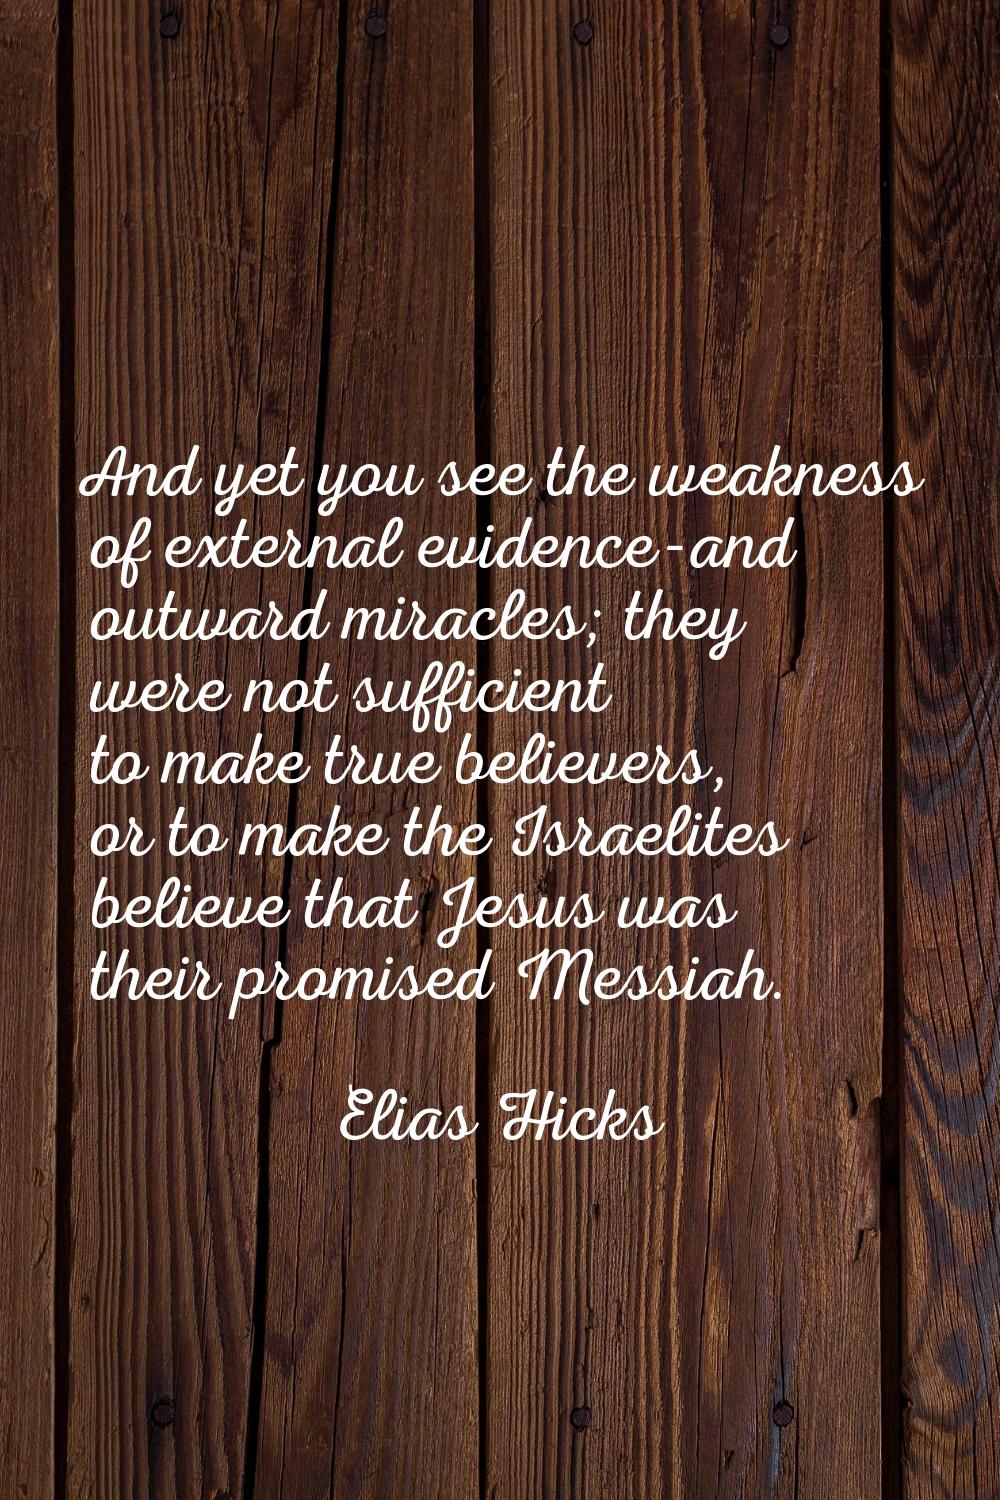 And yet you see the weakness of external evidence-and outward miracles; they were not sufficient to